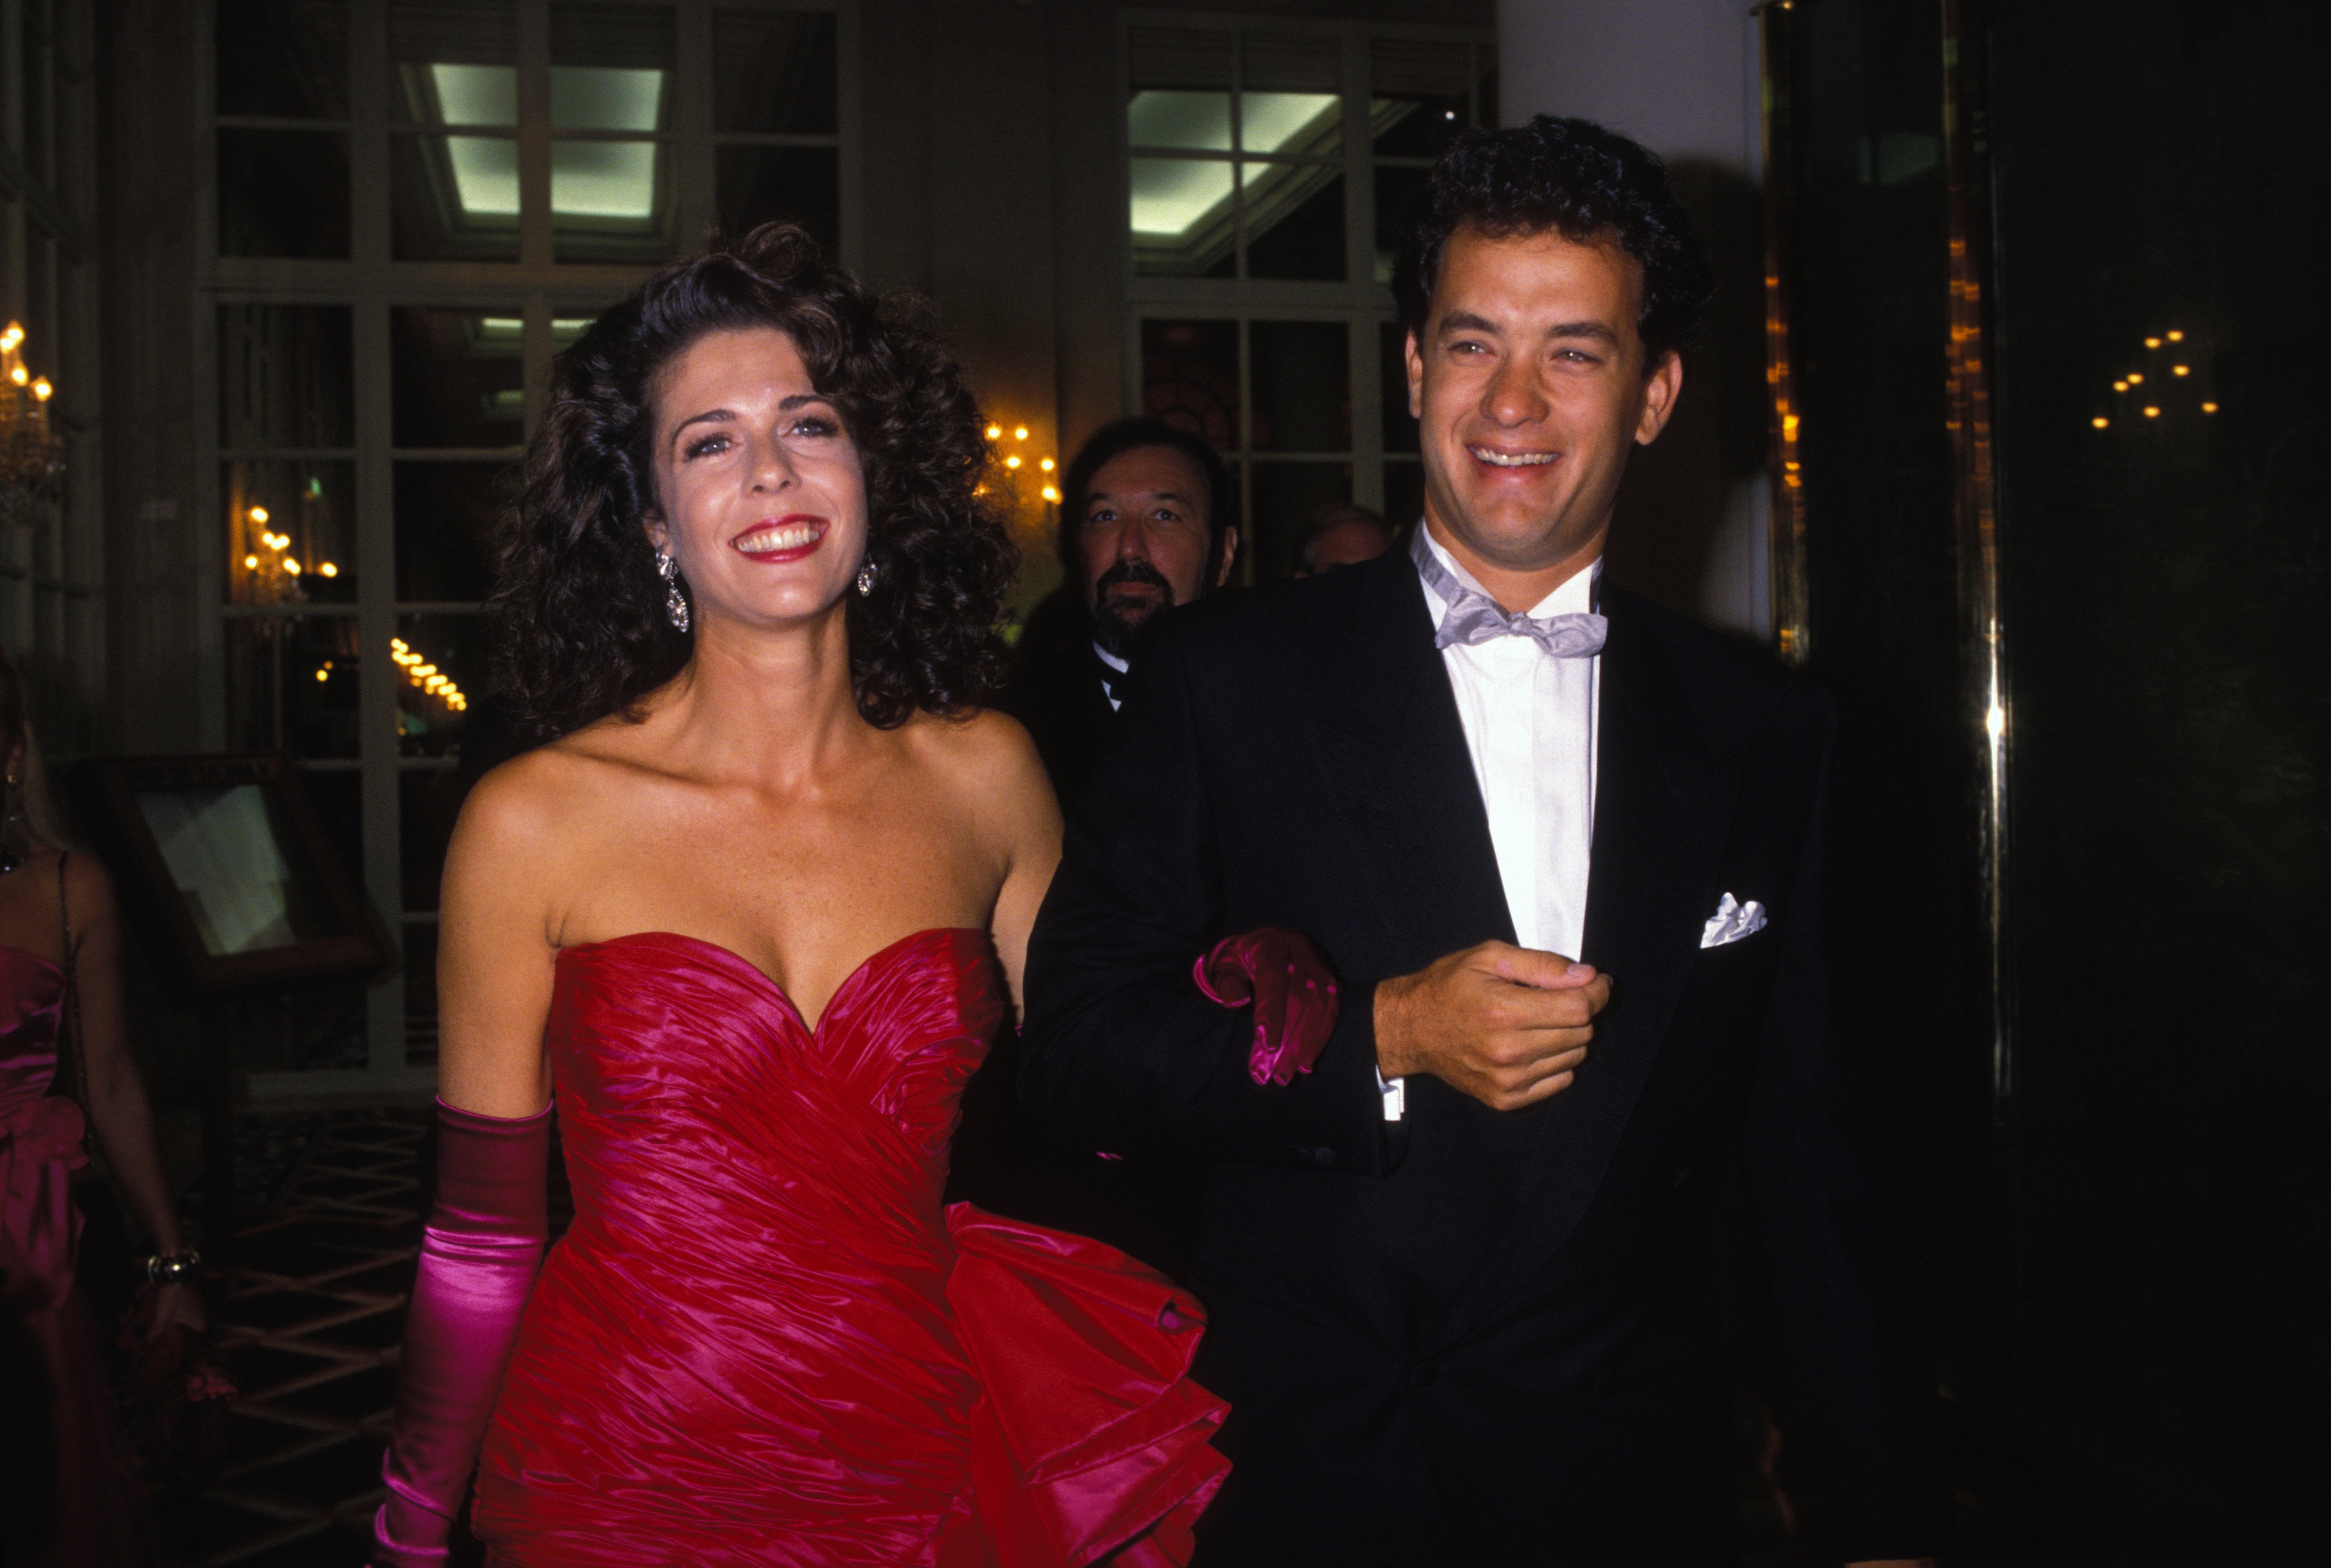 Actor Tom Hanks and his wife actress and singer Rita Wilson at the Deauville Festival in September 1988, France. | Source: Getty Images